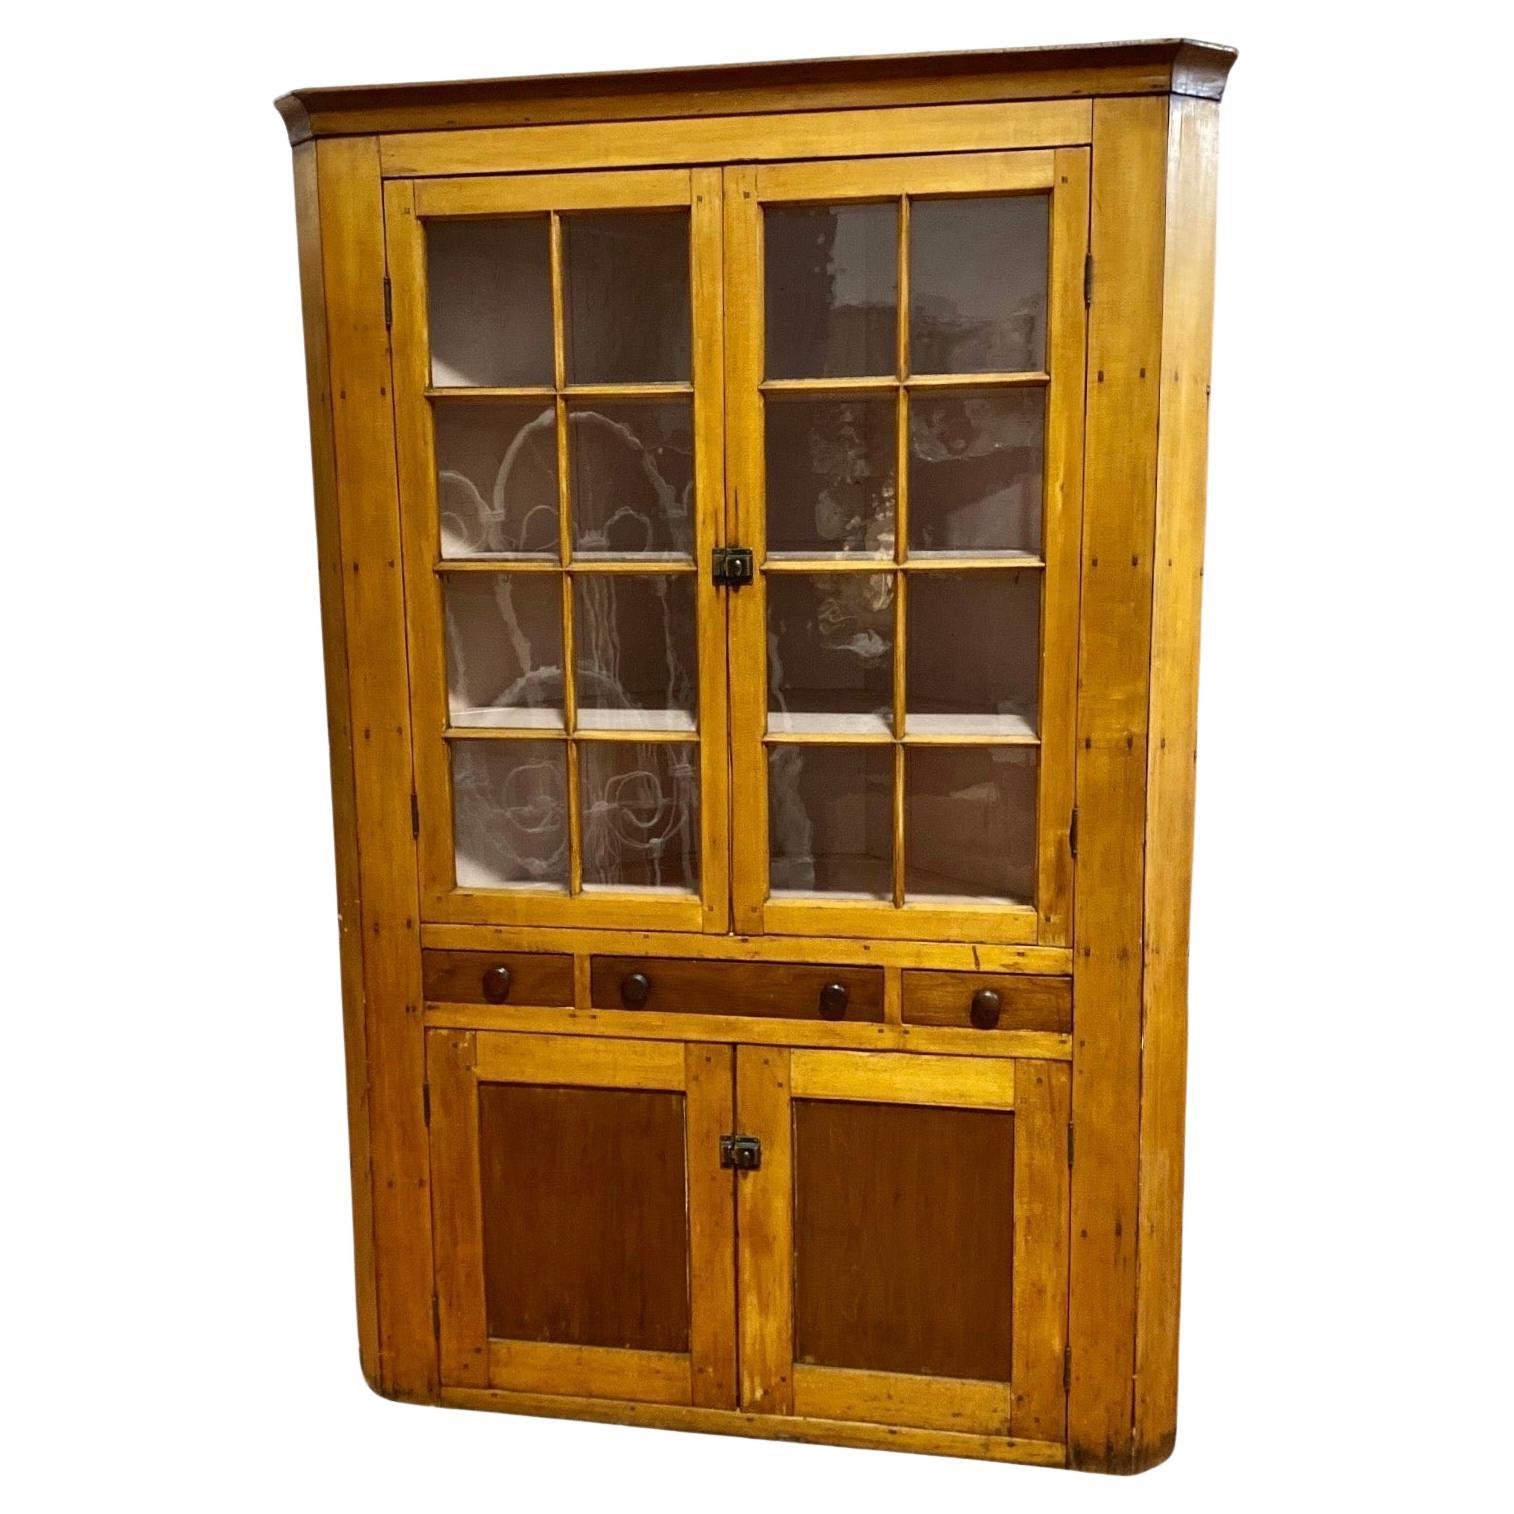 Antique Early 19th C. American Maple And Pine Corner Cabinet